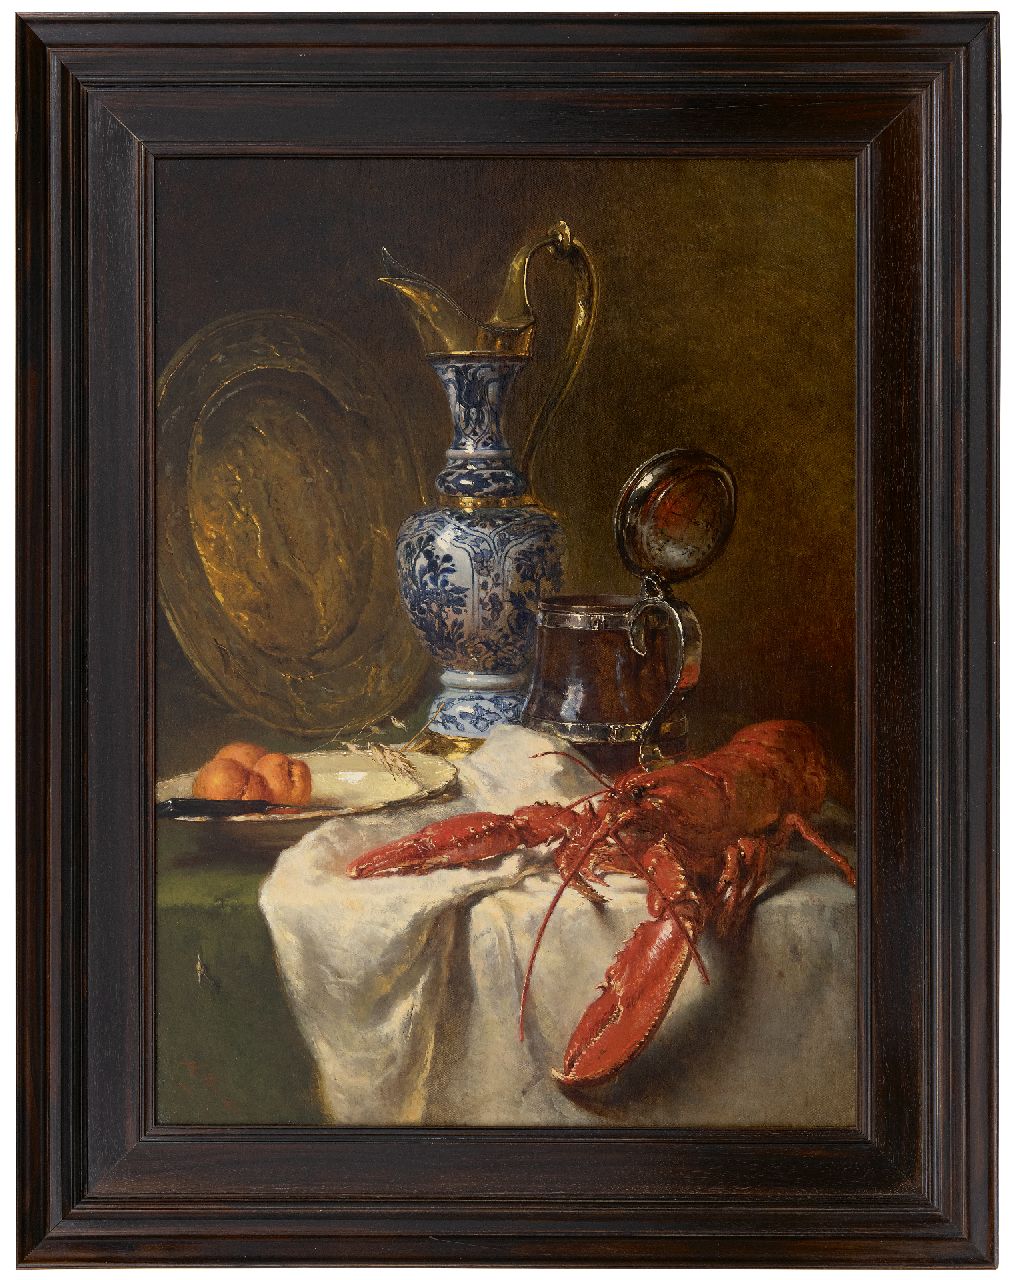 Vos M.  | Maria Vos, The best room, oil on canvas 80.0 x 58.0 cm, signed l.l. and dated 1875